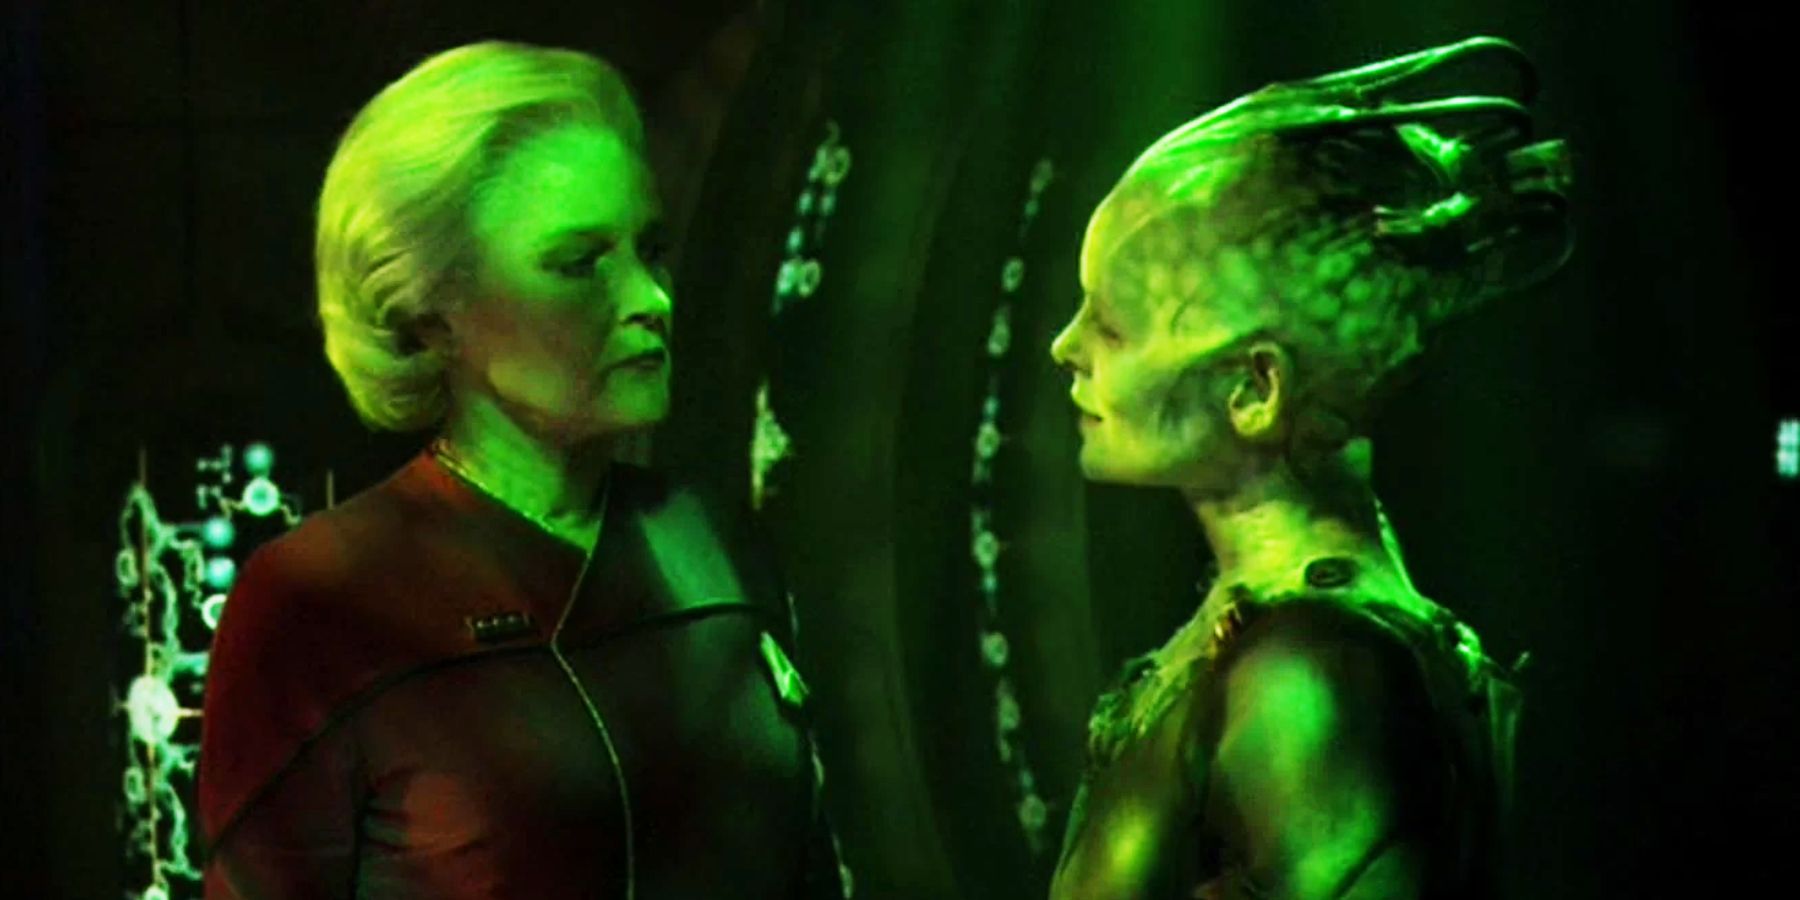 Admiral Janeway confronts the Borg Queen in the Star Trek Voyager finale